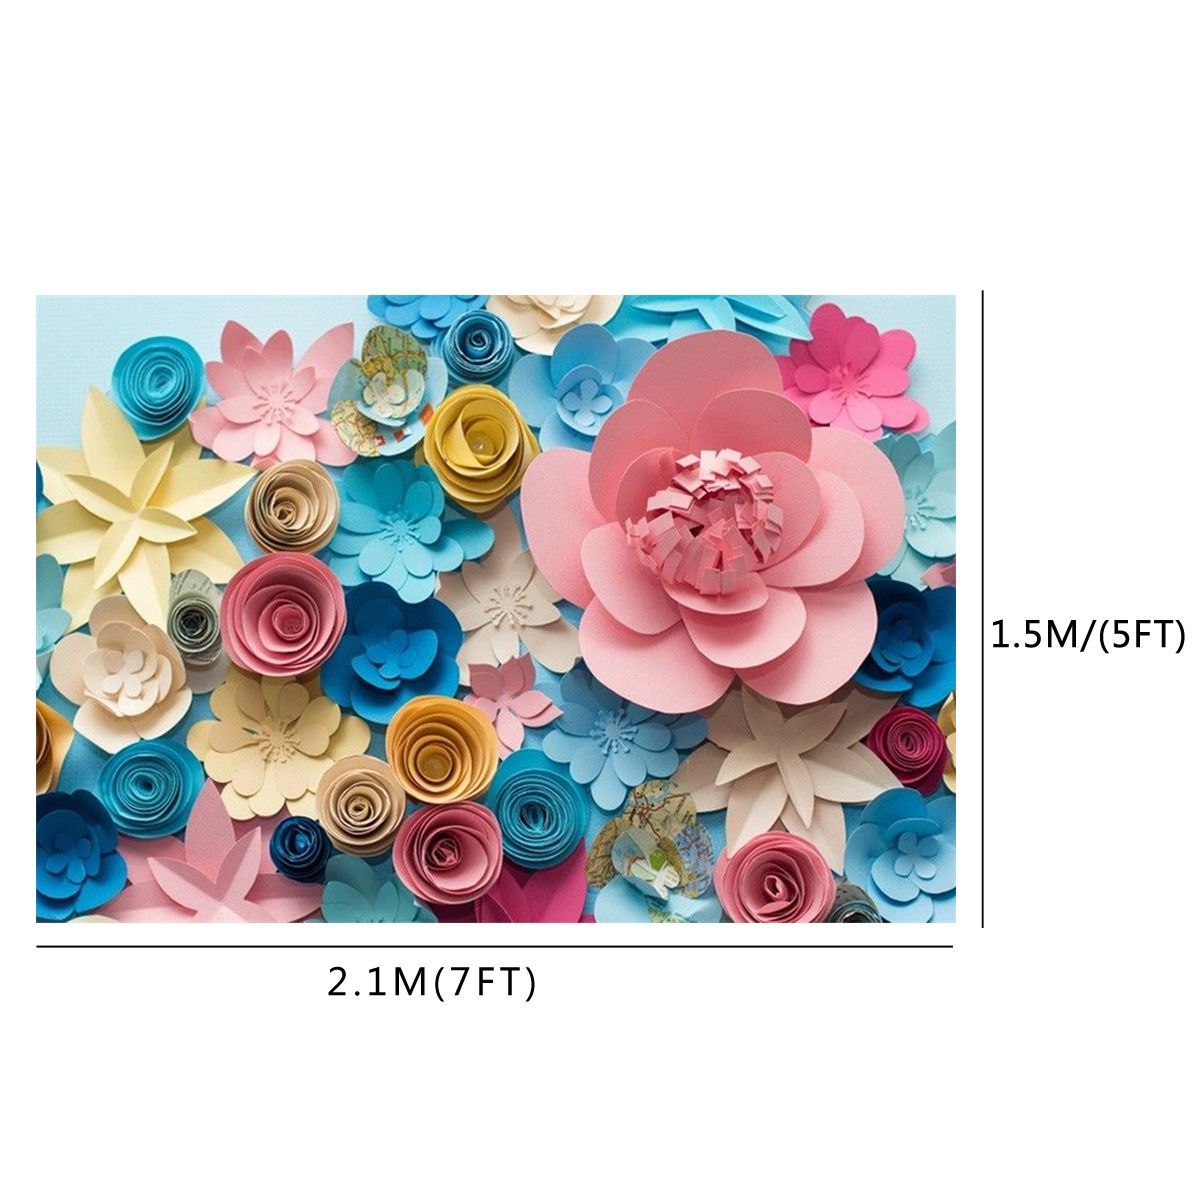 7x5FT-Colorful-Flower-Photography-Backdrop-Studio-Prop-Background-1391374